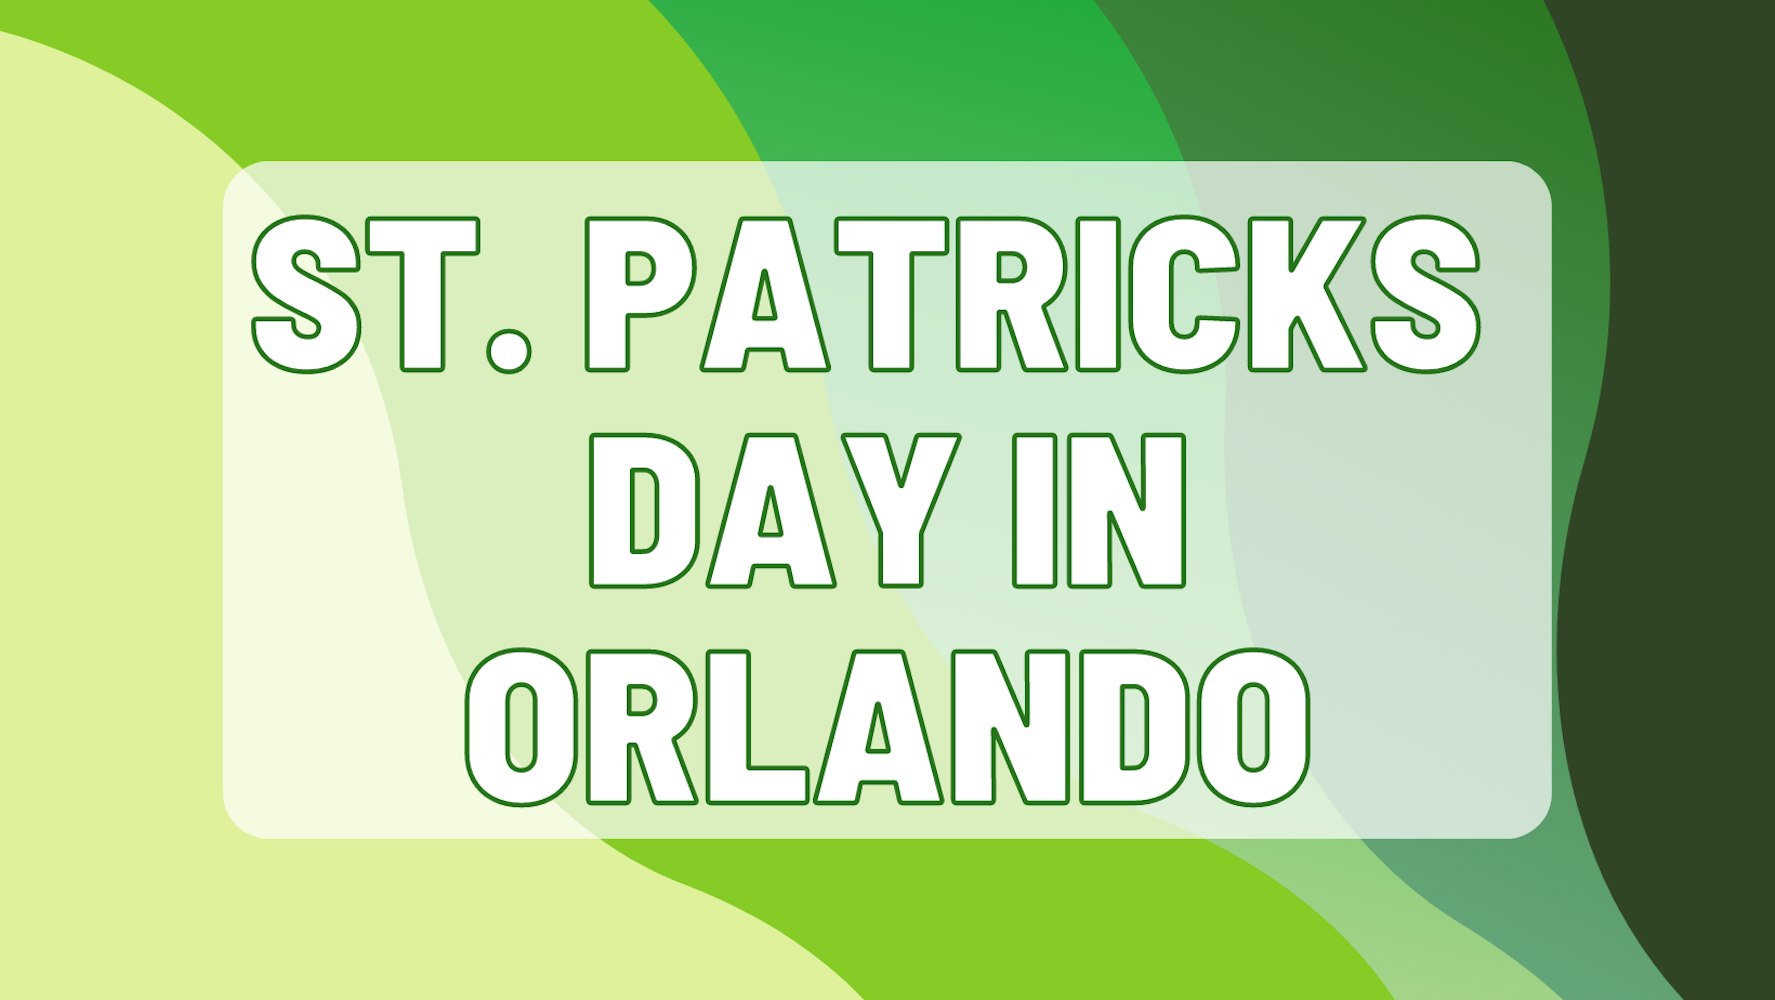 Cover Image for 5 Ways to Celebrate St. Paddy’s Day in Orlando